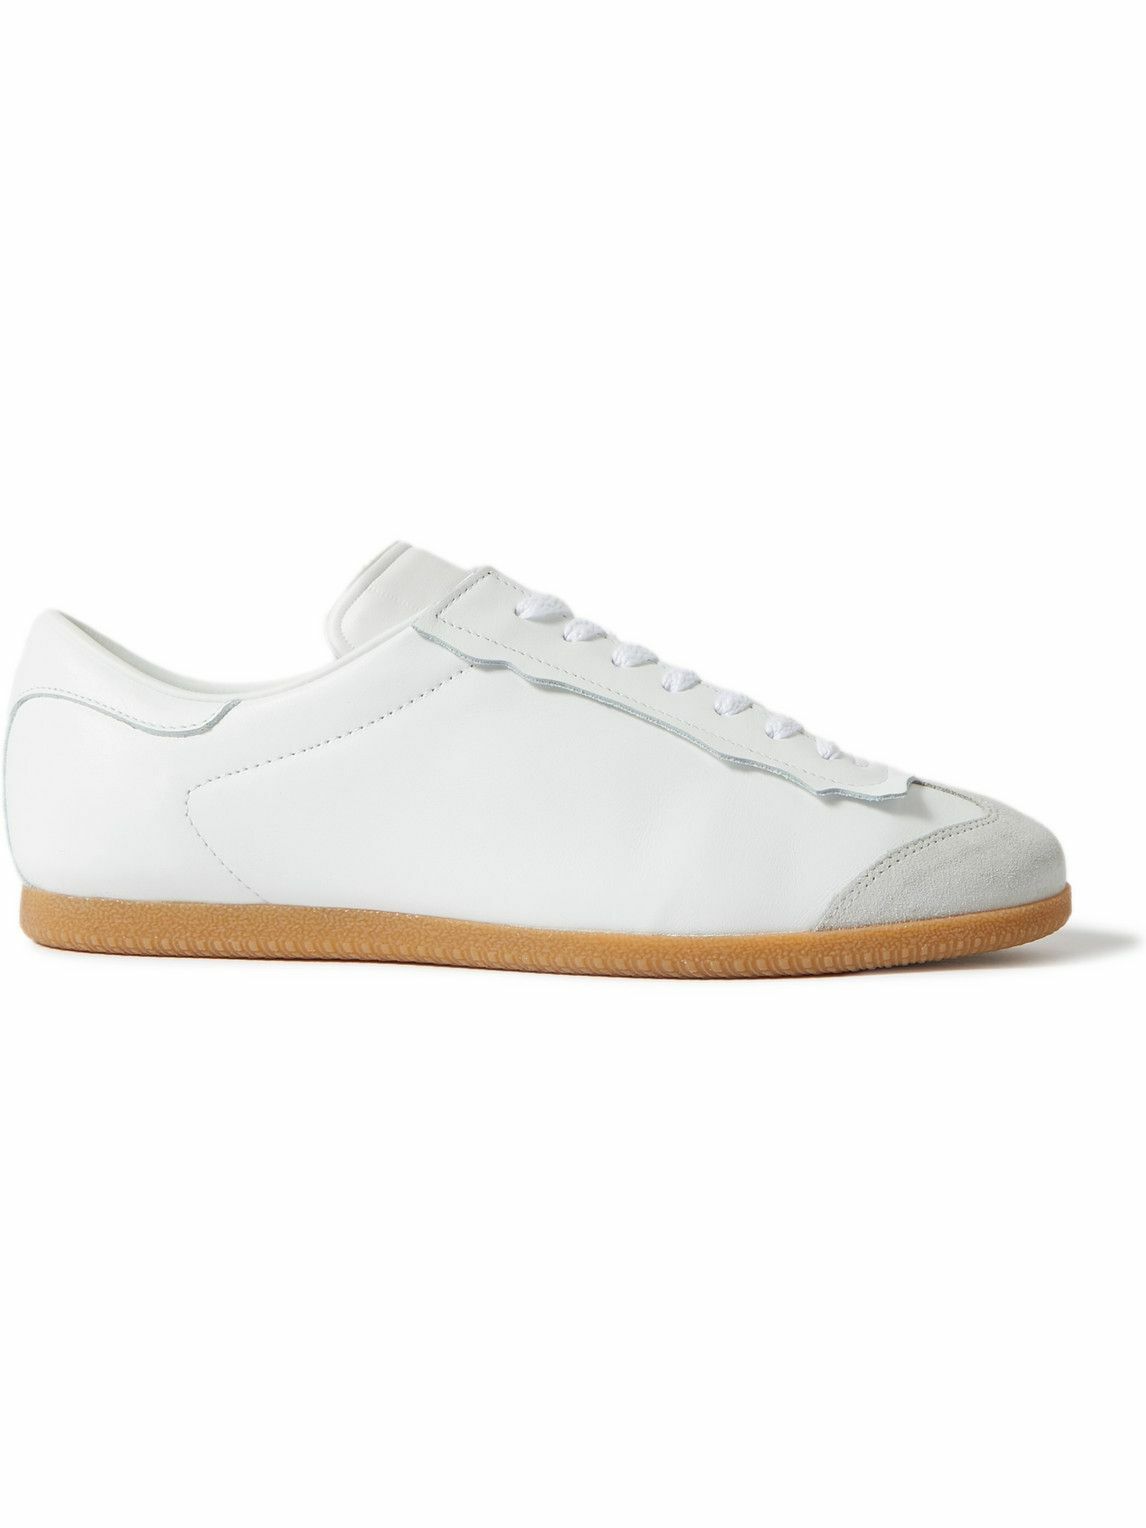 Photo: Maison Margiela - Feather Light Suede-Panelled Leather Sneakers - White